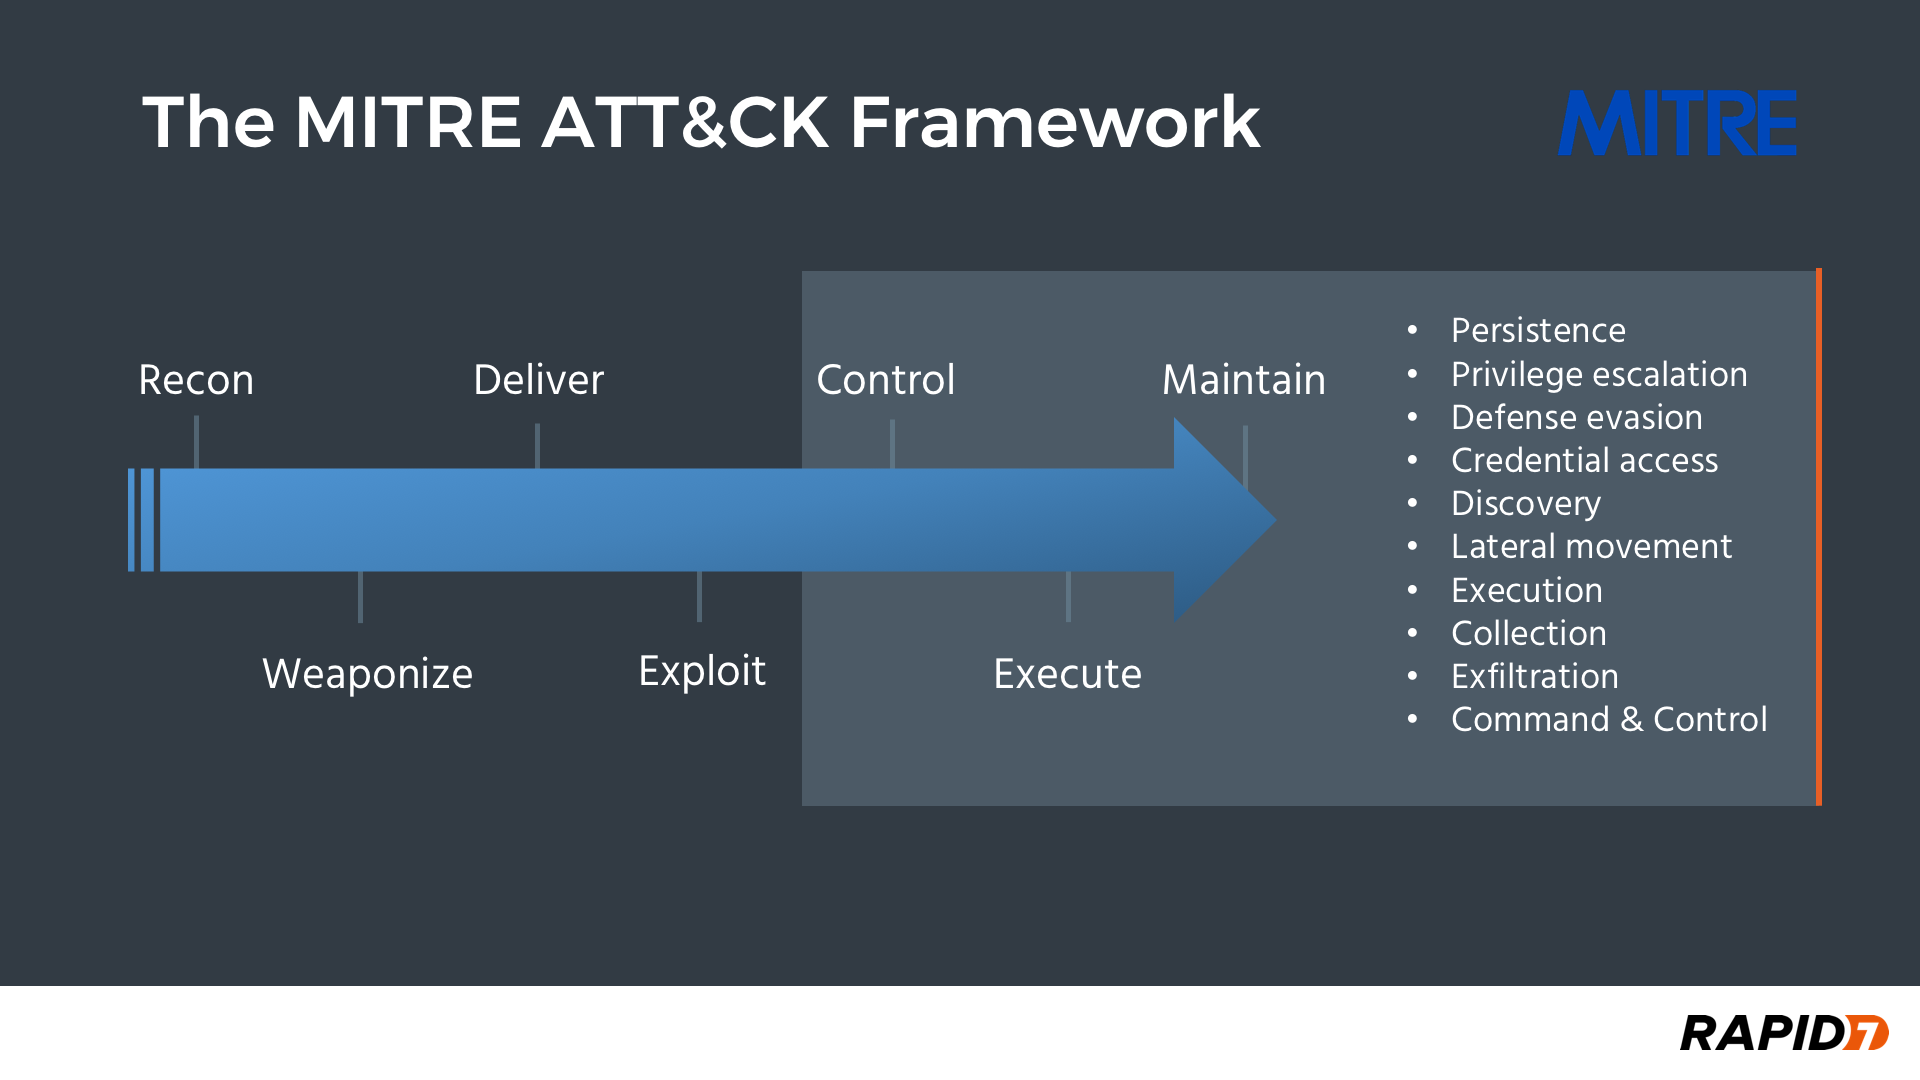 Why Mitre Attck Matters Real Security Images